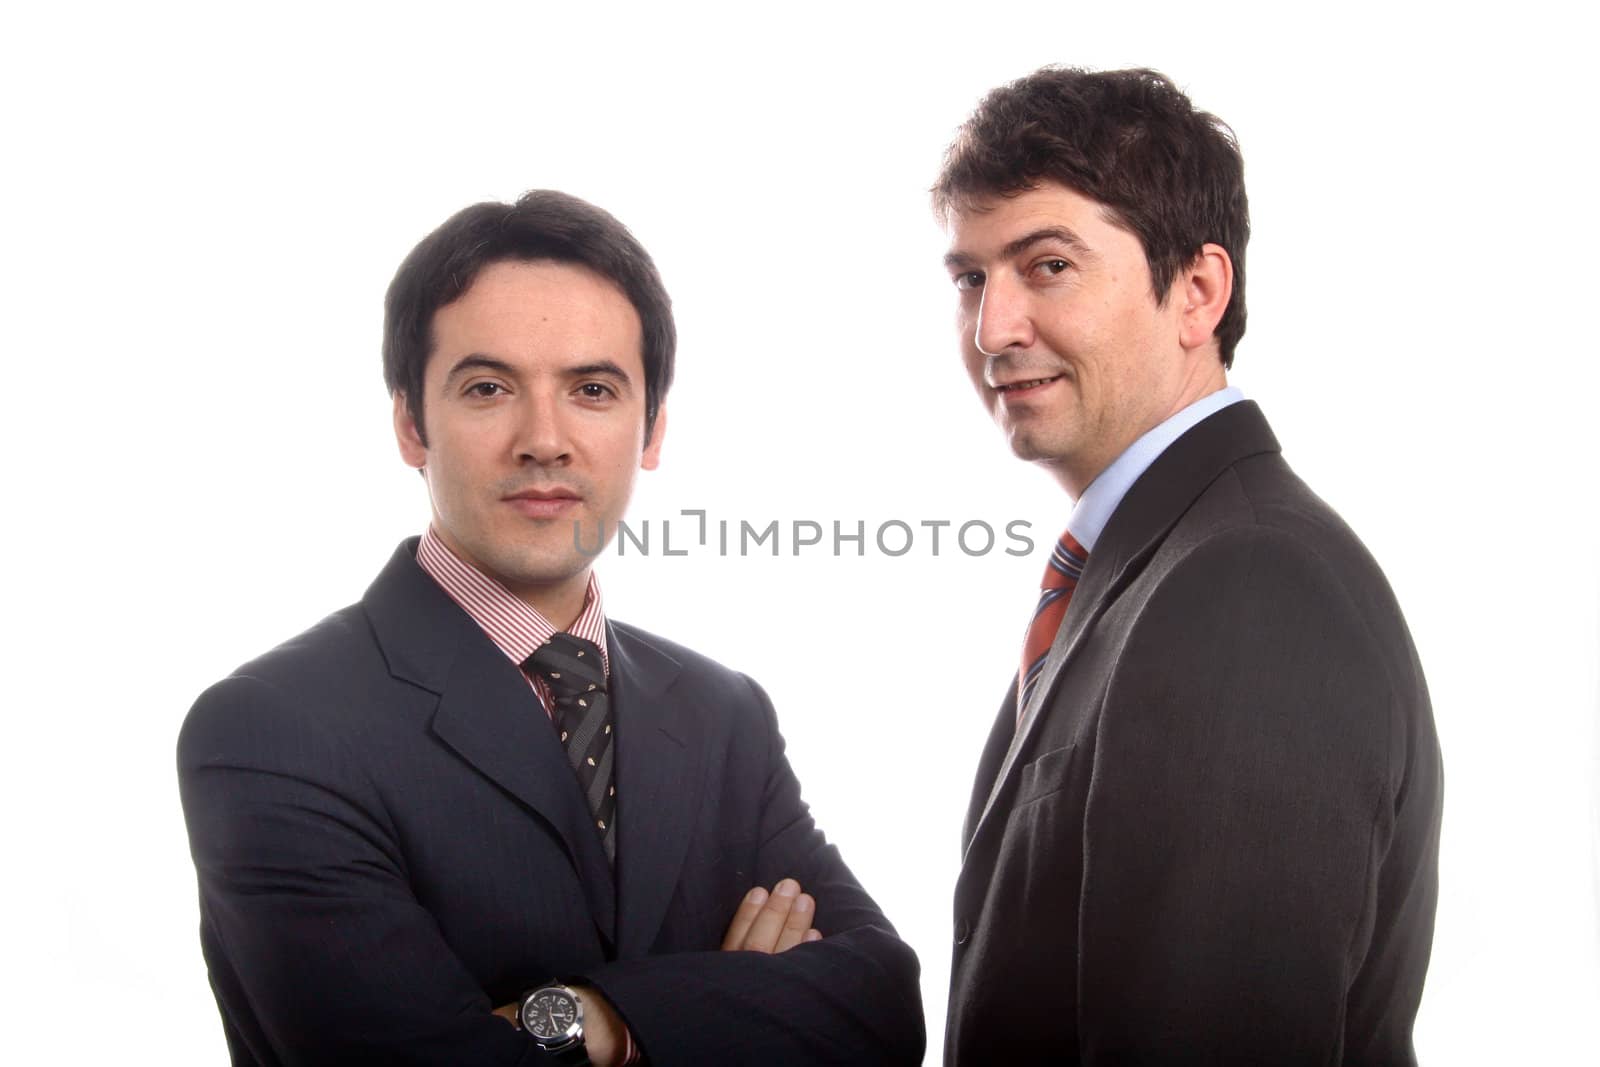  business men portrait on white by jfcalheiros